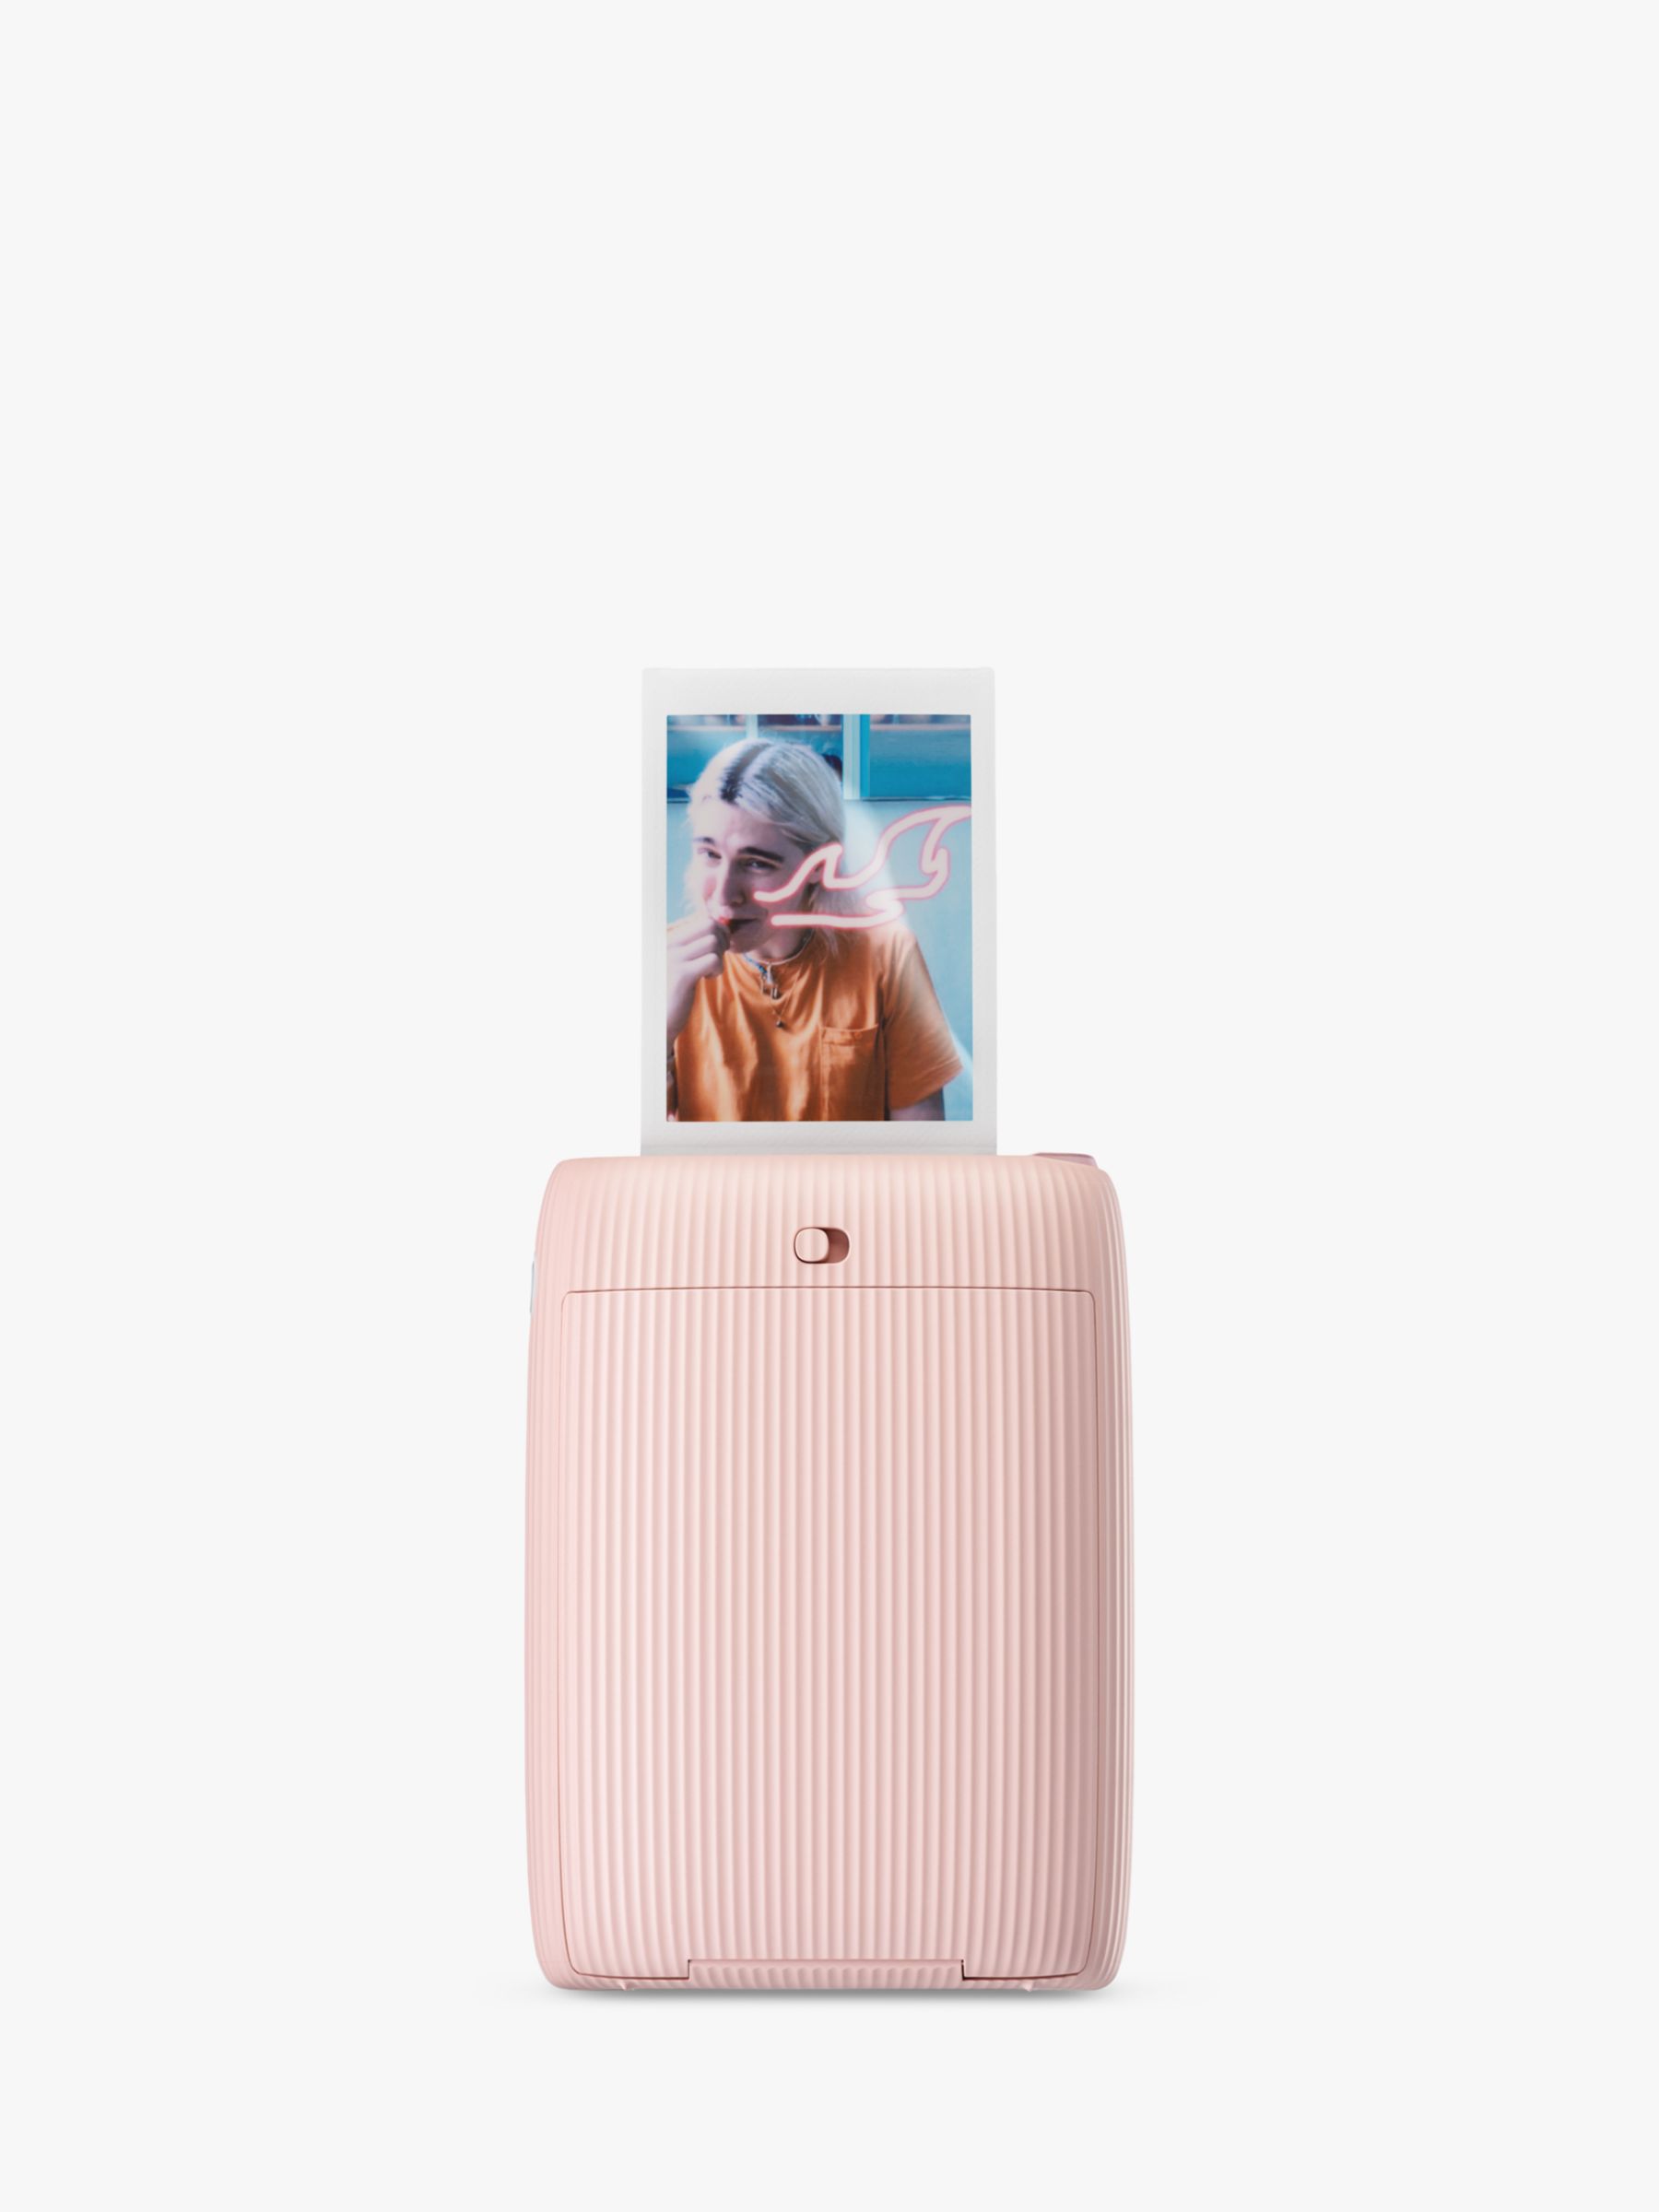 Fujifilm Instax Mini Link 2 Smartphone Photo Printer, Wireless, Portable,  and Lightweight Instant Film Printer, Bluetooth, Compatible on iPhone IOS  or